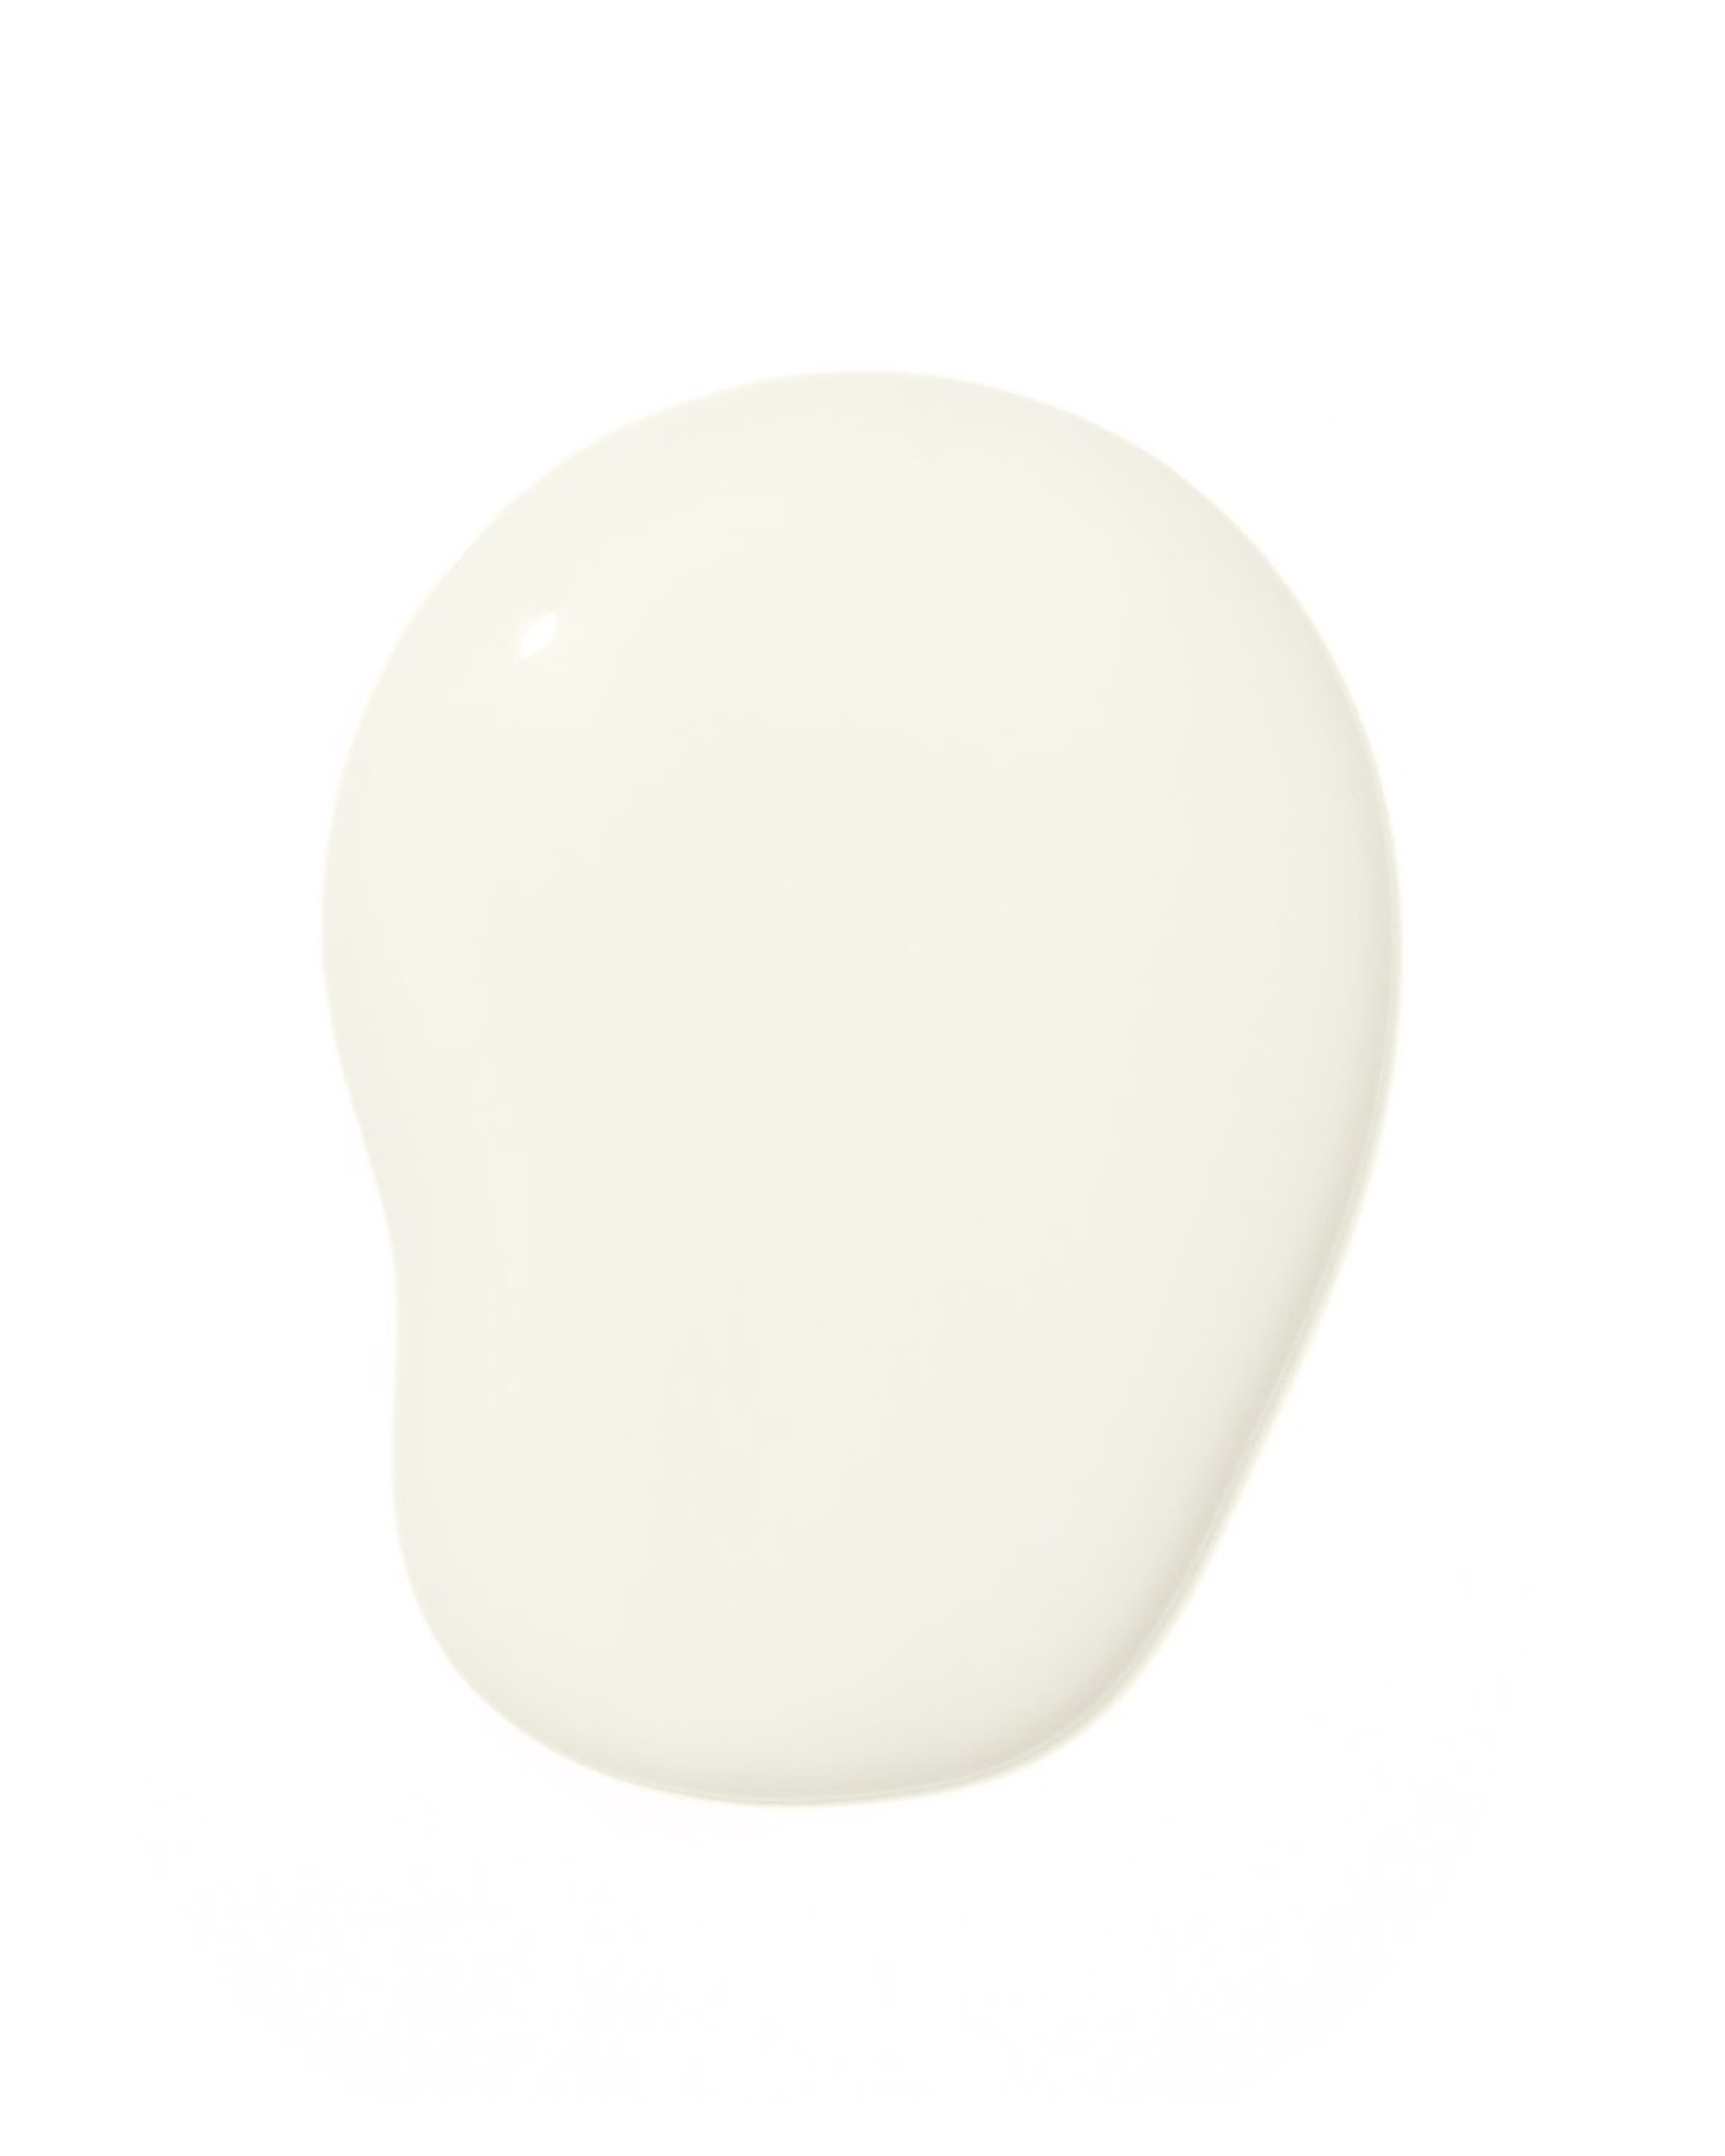 Clare Paint, Timeless, Wall Paint Eggshell, Gallon - Clare Paint